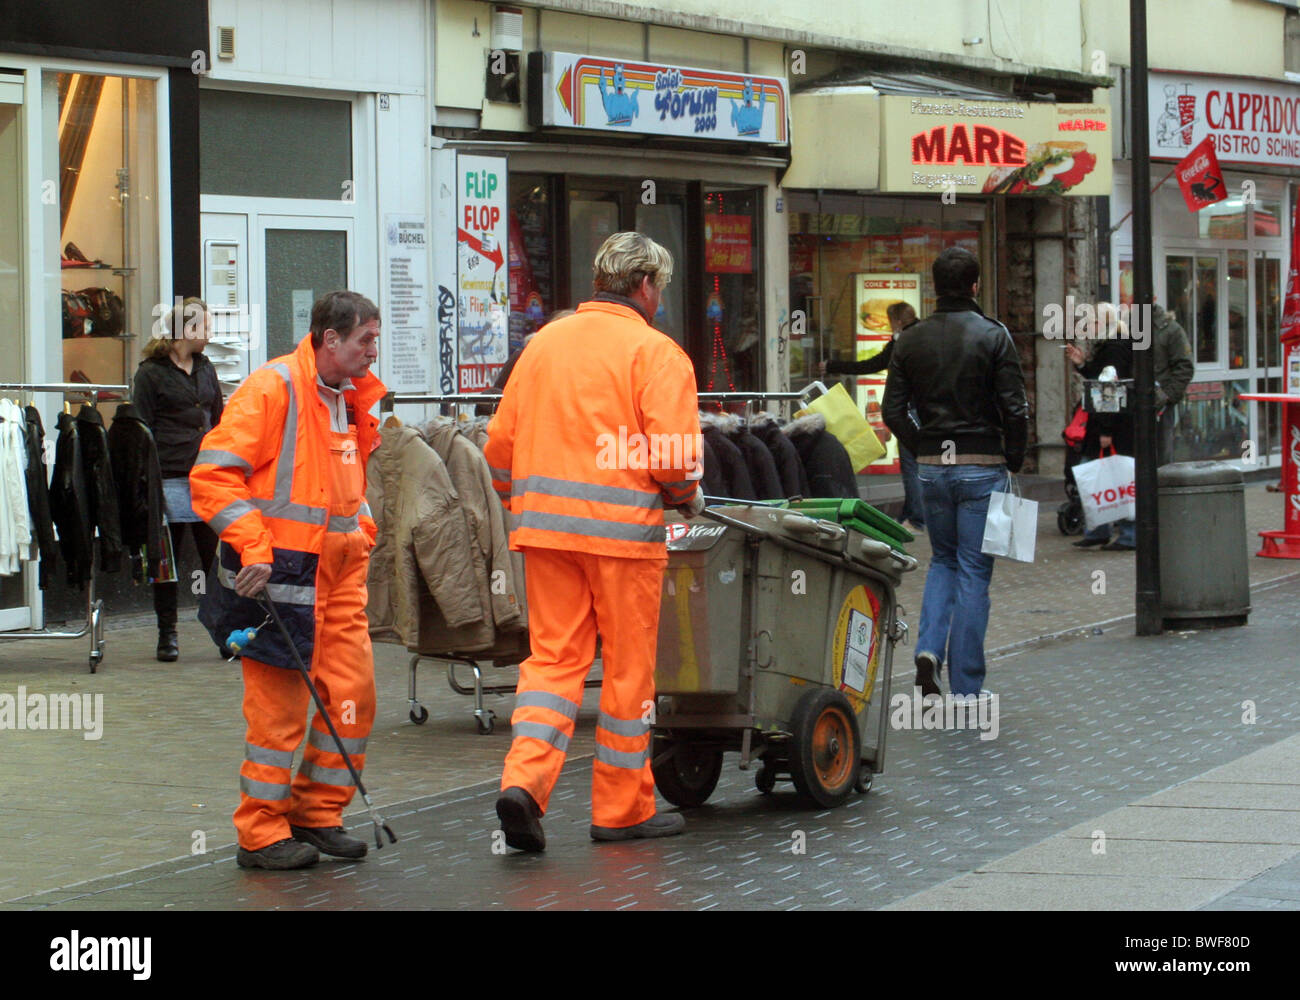 Employees of city sanitation department cleaning the streets, Dortmund, Germany Stock Photo